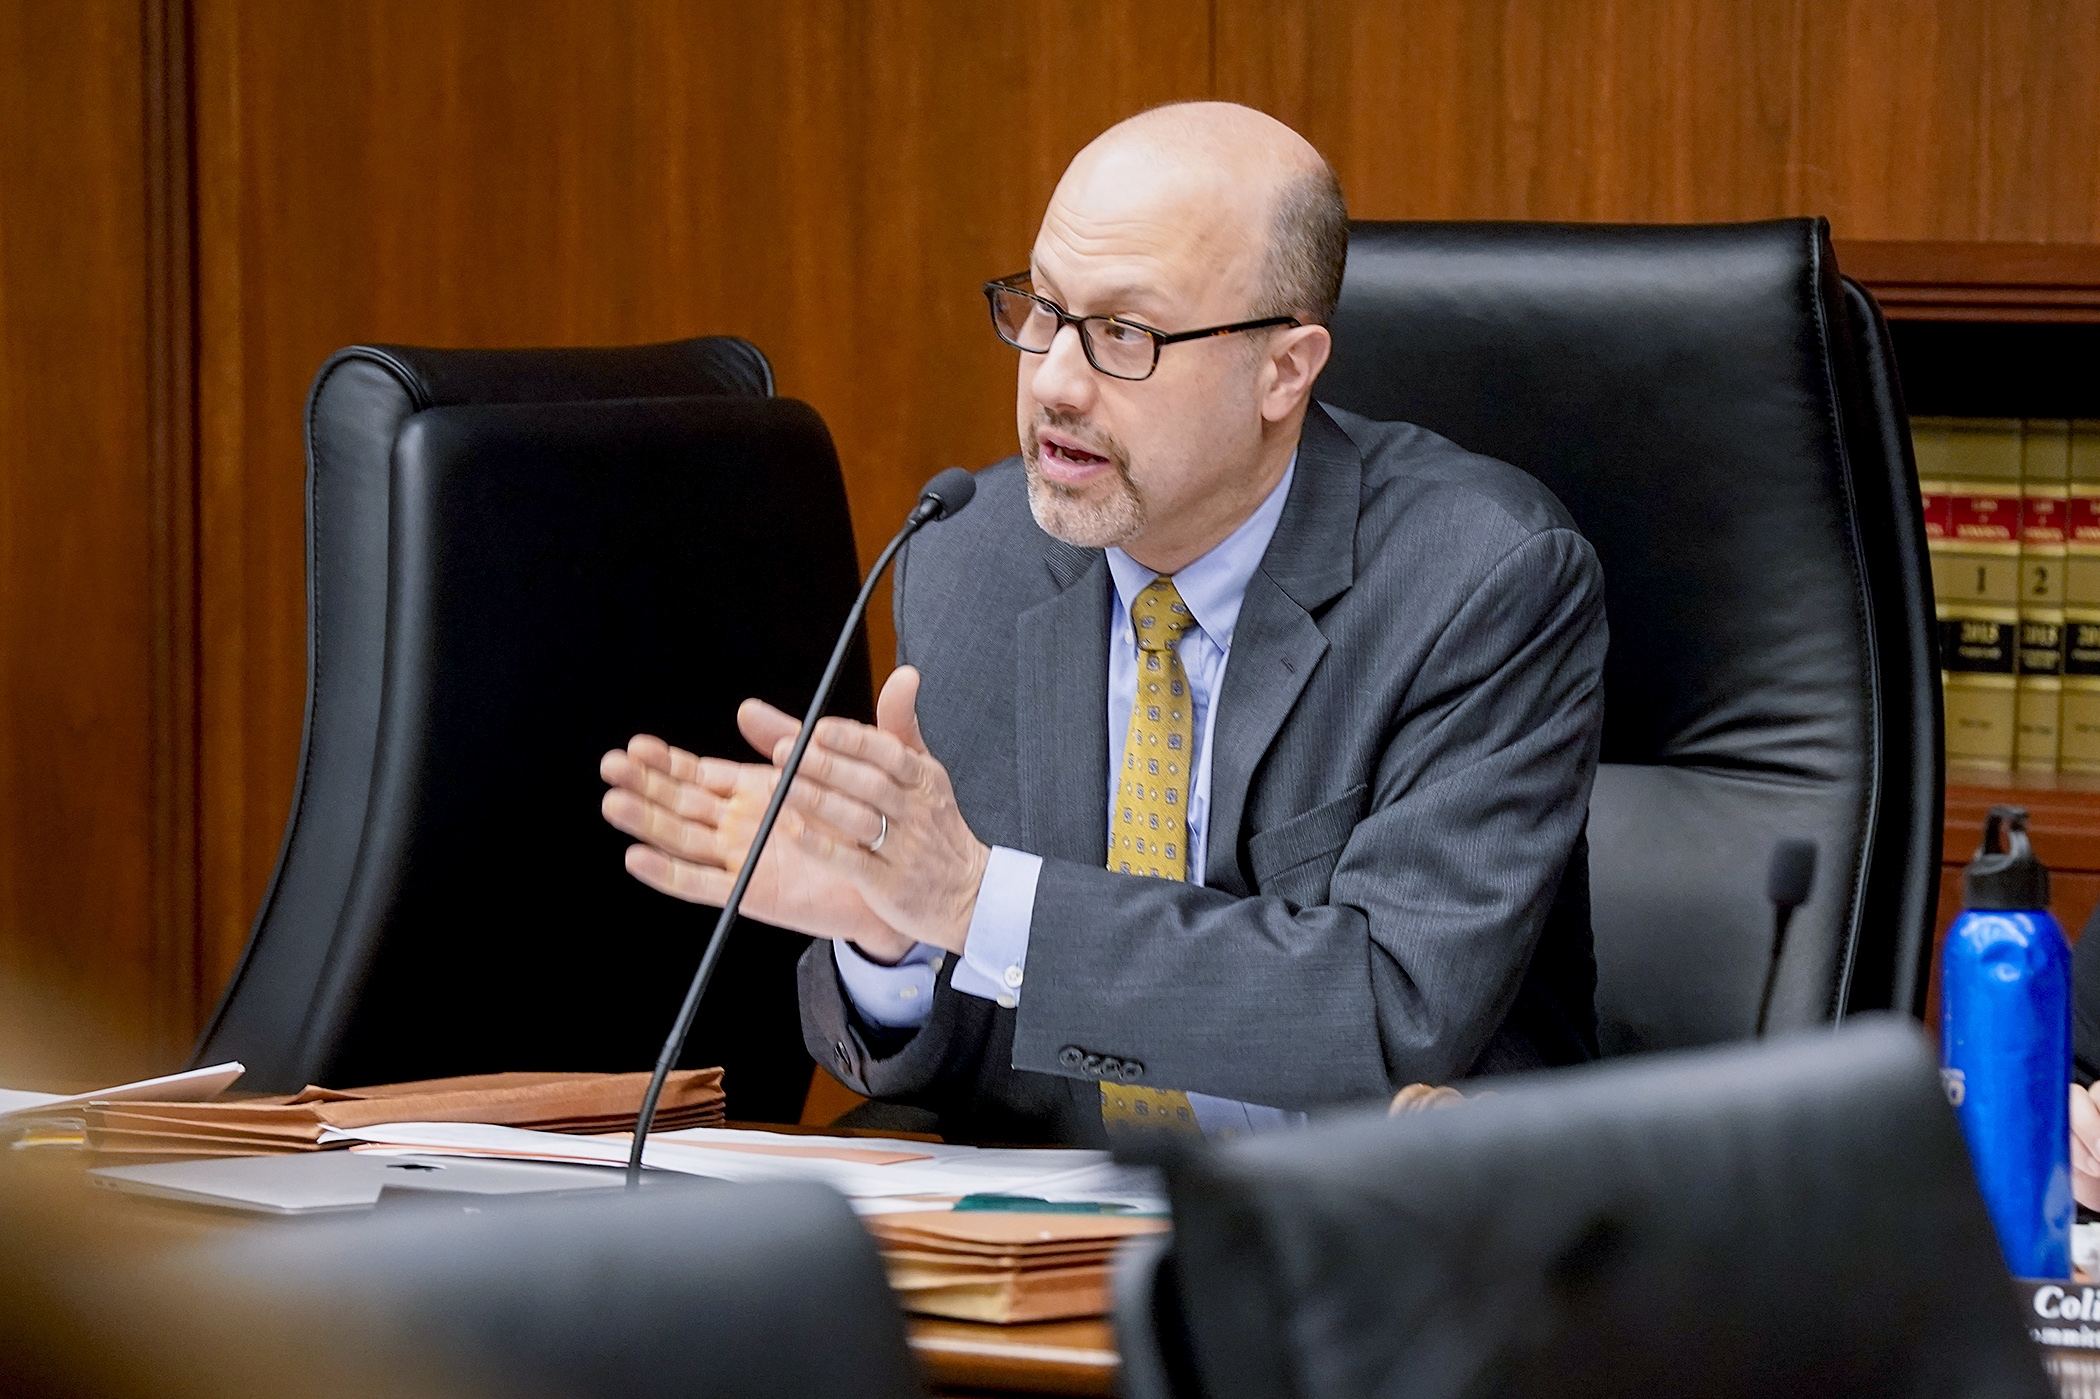 Rep. Dave Pinto, chair of the House Children and Families Finance and Policy Committee, comments on HF2476 following a walkthrough of the proposed supplemental budget bill. (Photo by Michele Jokinen)